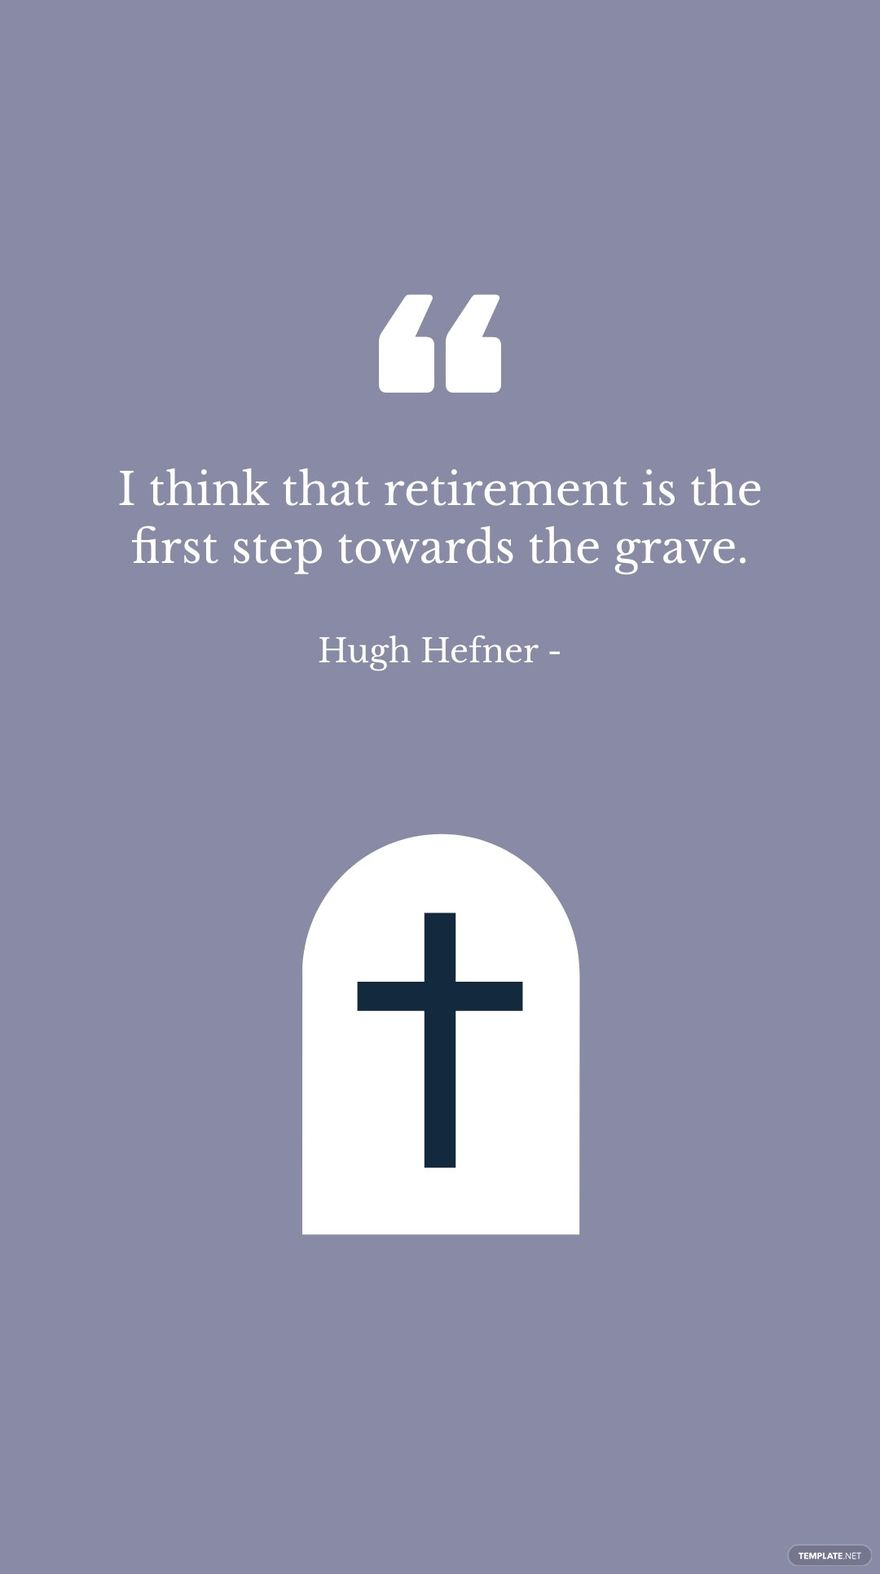 Free Hugh Hefner - I think that retirement is the first step towards the grave.